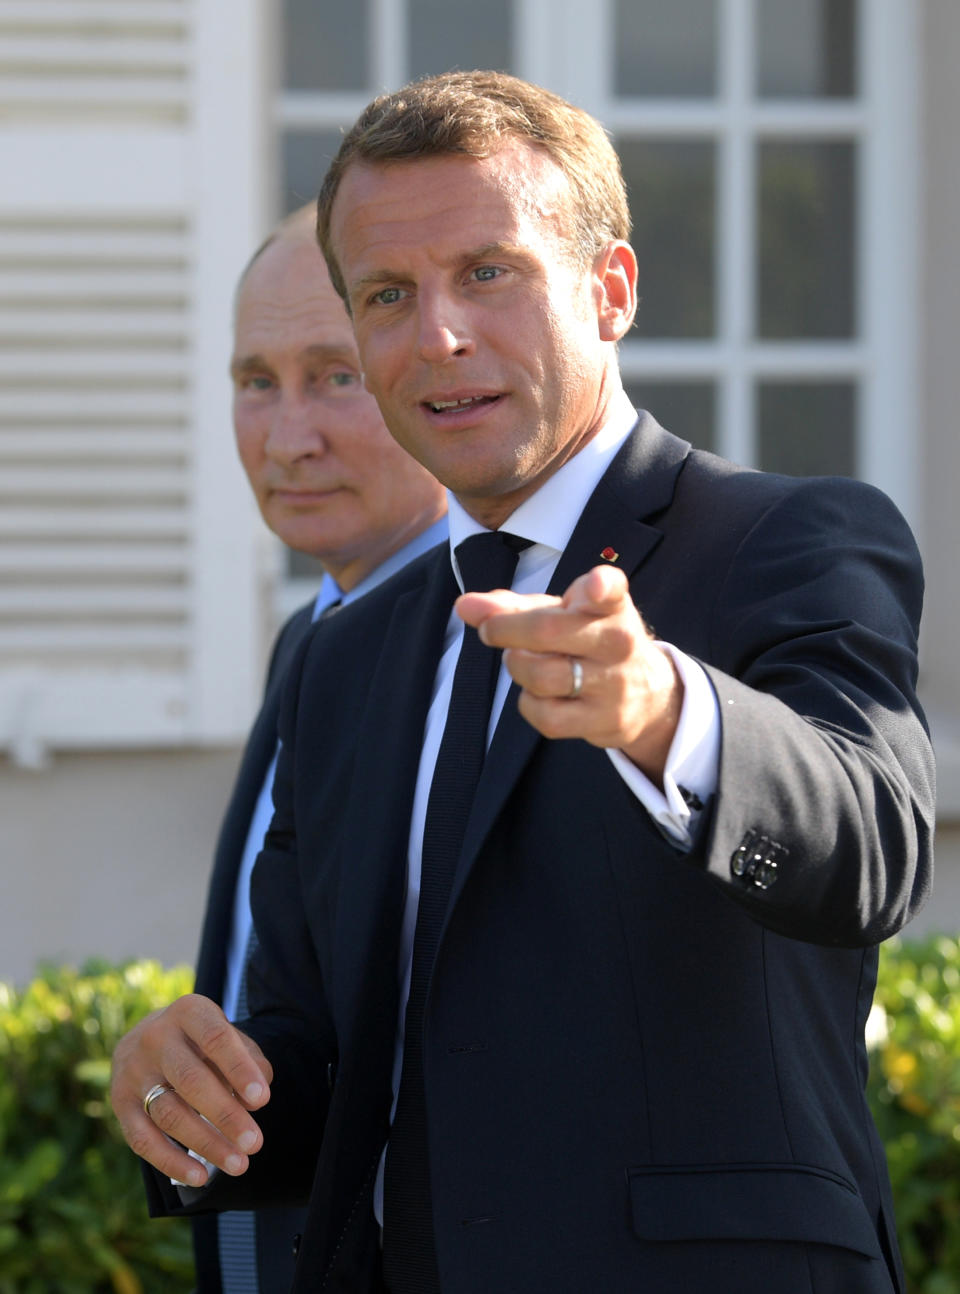 French President Emmanuel Macron, right, gestures with Russian President Vladimir Putin ahead of their meeting at the fort of Bregancon in Bormes-les-Mimosas, southern France, Monday Aug. 19, 2019. French President Emmanuel Macron and Russian President Vladimir Putin are meeting to discuss the world's major crises, including Ukraine, Iran and Syria, and try to improve Moscow's relations with the European Union. (Alexei Druzhinin, Sputnik, Kremlin Pool Photo via AP)